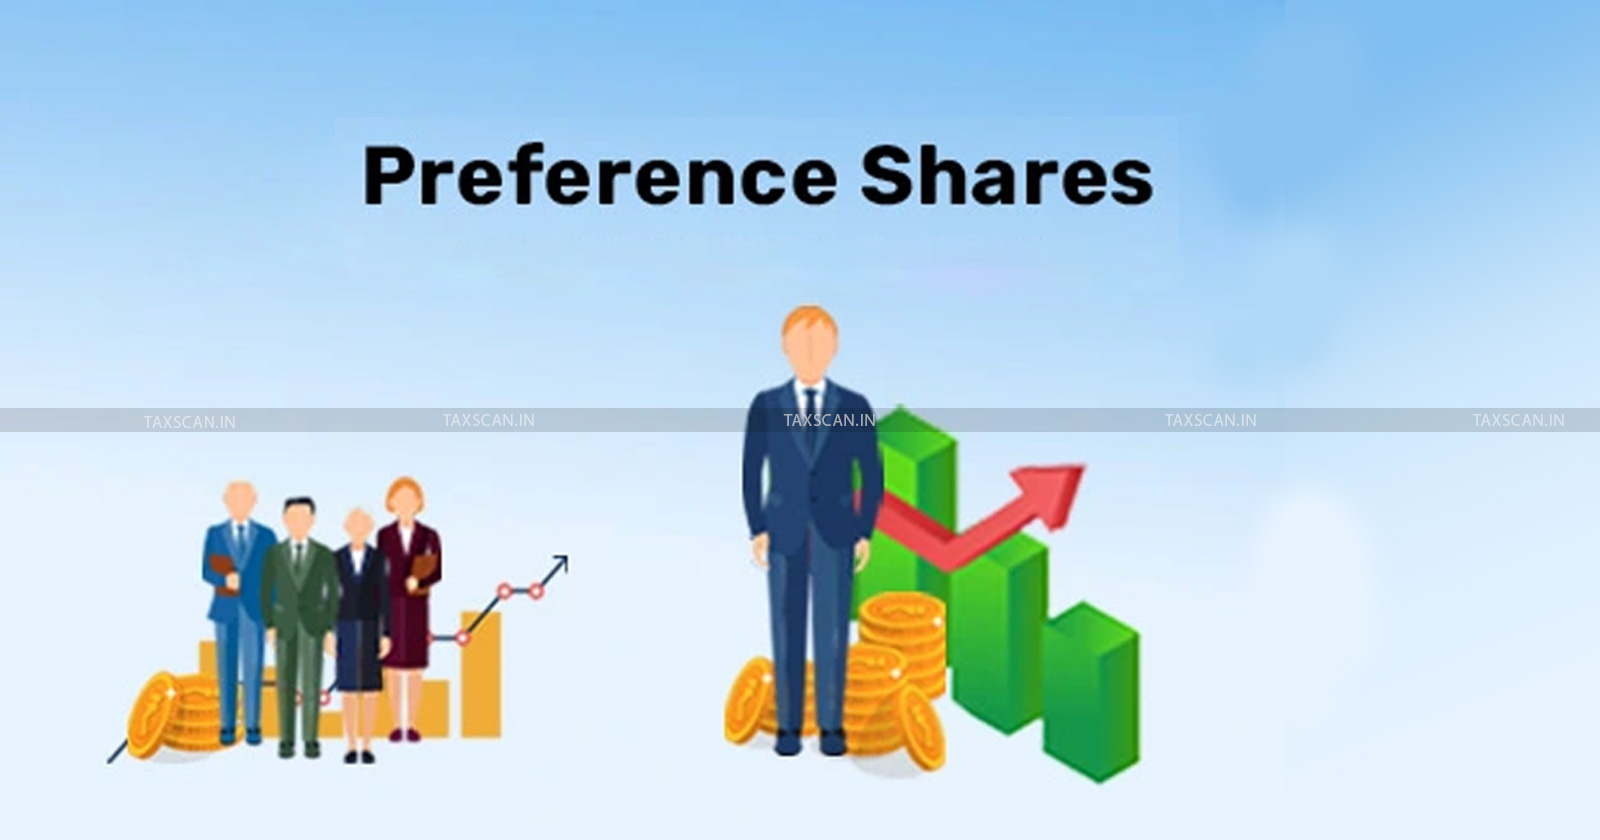 NCLAT - Preference Shares - Redeemable Preference Shares - Operational Creditor - taxscan